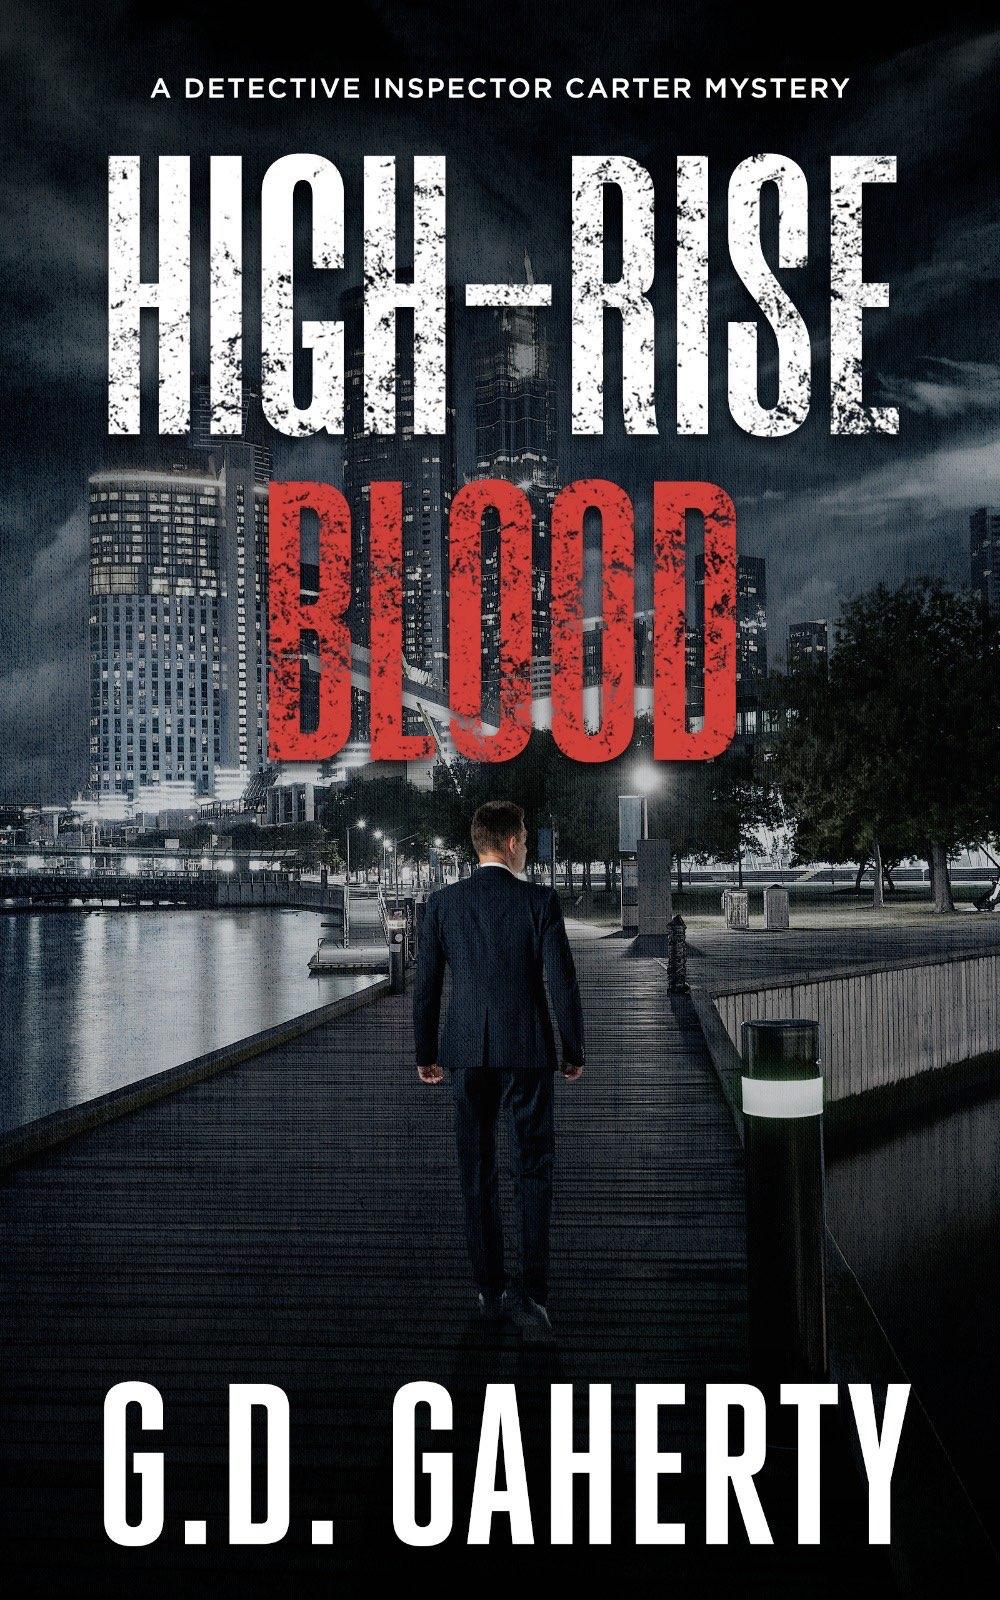 Book cover featuring detective walking away from the viewer along a moody Melbourne dock with the city shining in the background.